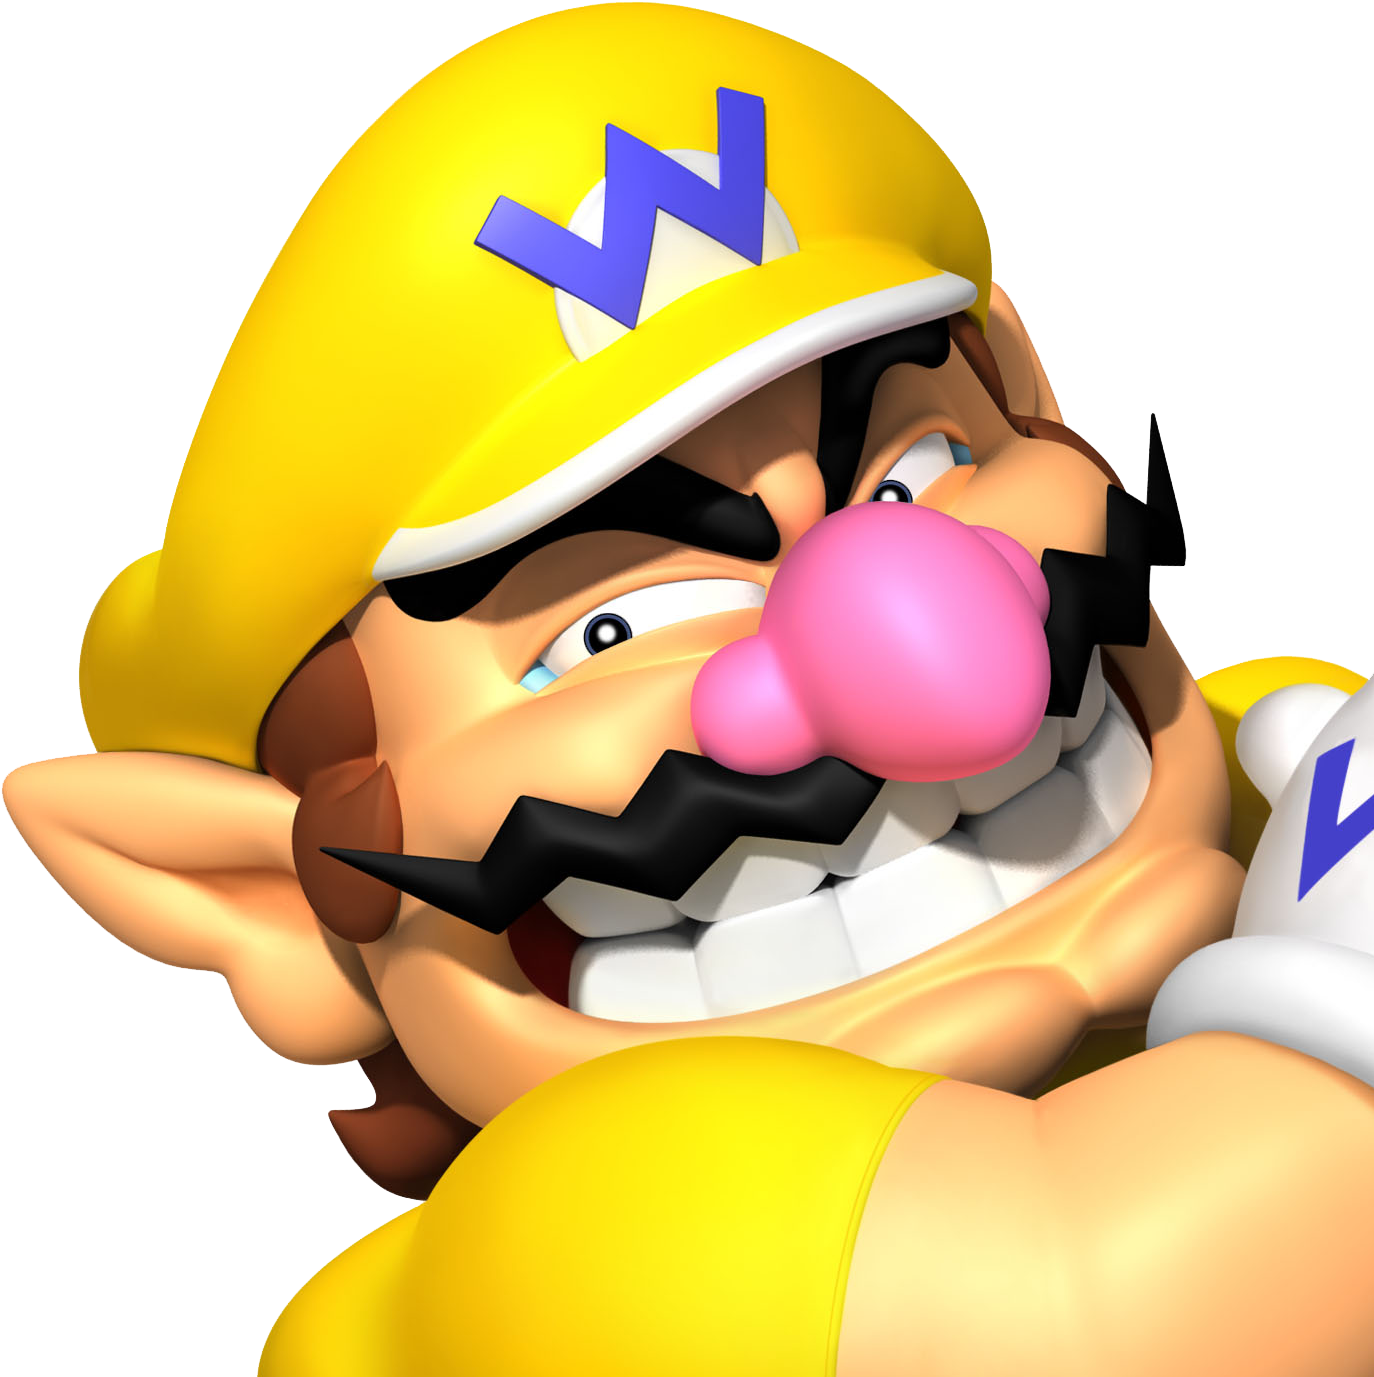 Wario Grinning Character Portrait PNG image